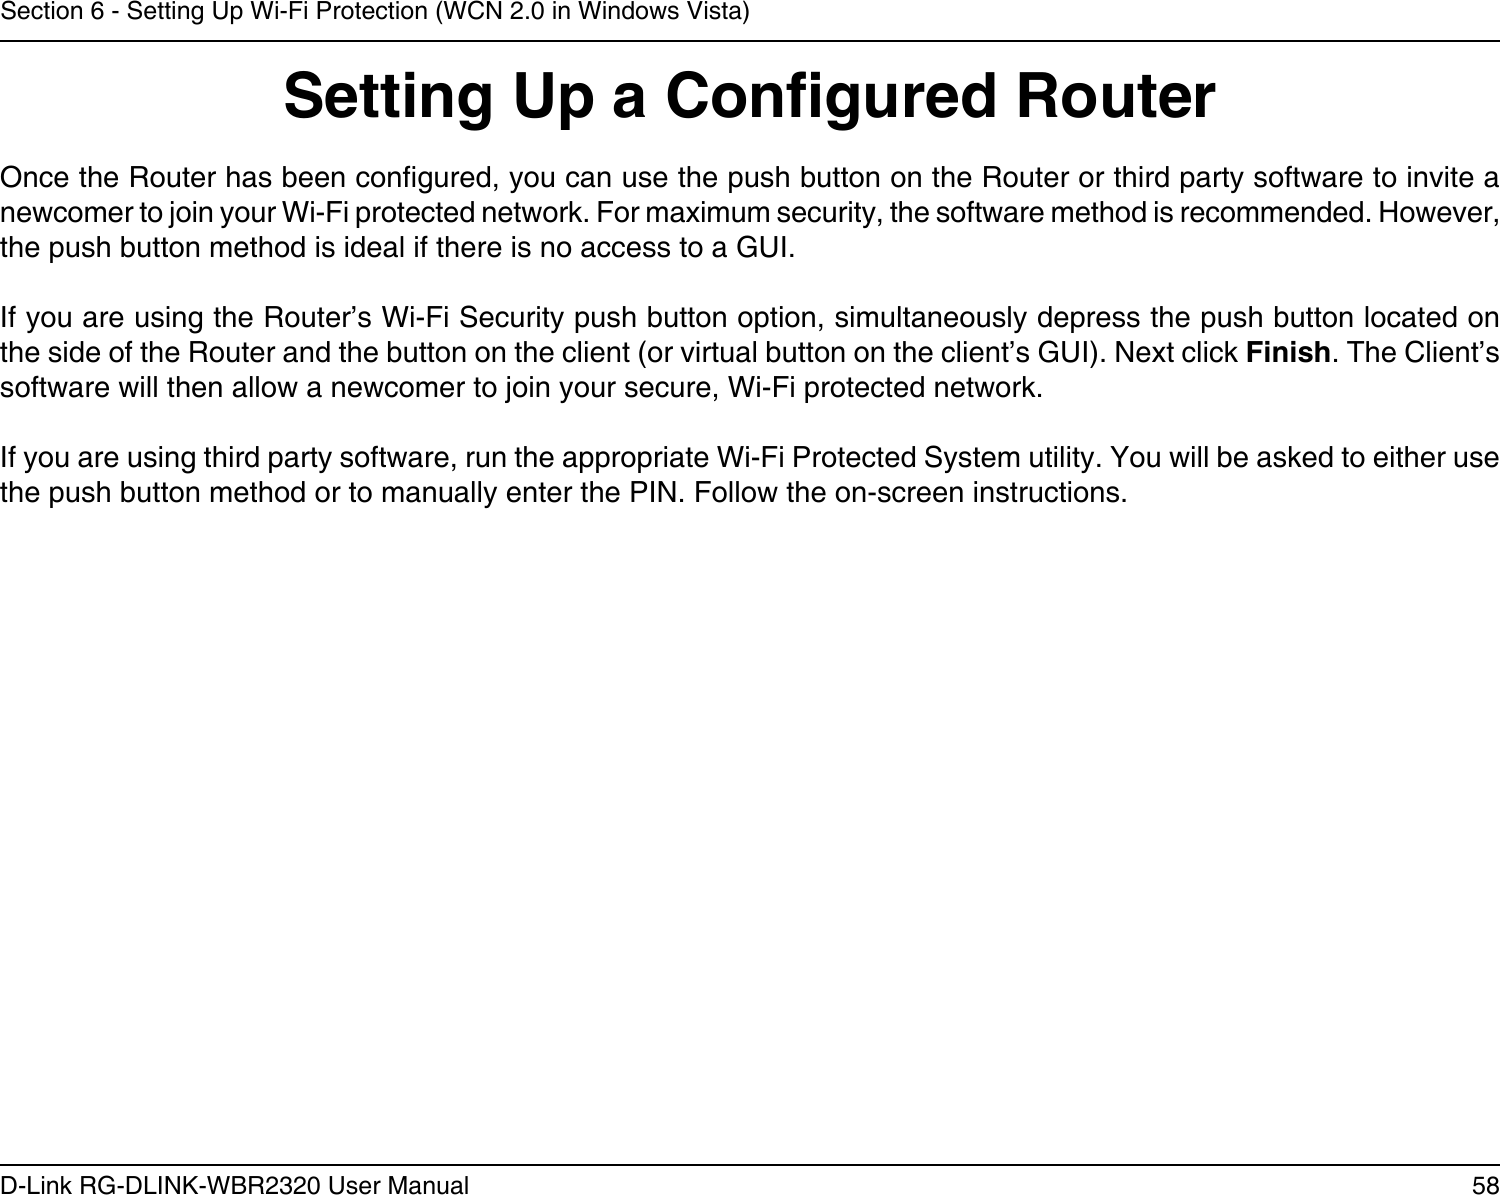 58D-Link RG-DLINK-WBR2320 User ManualSection 6 - Setting Up Wi-Fi Protection (WCN 2.0 in Windows Vista)Setting Up a Congured RouterOnce the Router has been congured, you can use the push button on the Router or third party software to invite a newcomer to join your Wi-Fi protected network. For maximum security, the software method is recommended. However, the push button method is ideal if there is no access to a GUI.If you are using the Router’s Wi-Fi Security push button option, simultaneously depress the push button located on the side of the Router and the button on the client (or virtual button on the client’s GUI). Next click Finish. The Client’s software will then allow a newcomer to join your secure, Wi-Fi protected network.If you are using third party software, run the appropriate Wi-Fi Protected System utility. You will be asked to either use the push button method or to manually enter the PIN. Follow the on-screen instructions.        